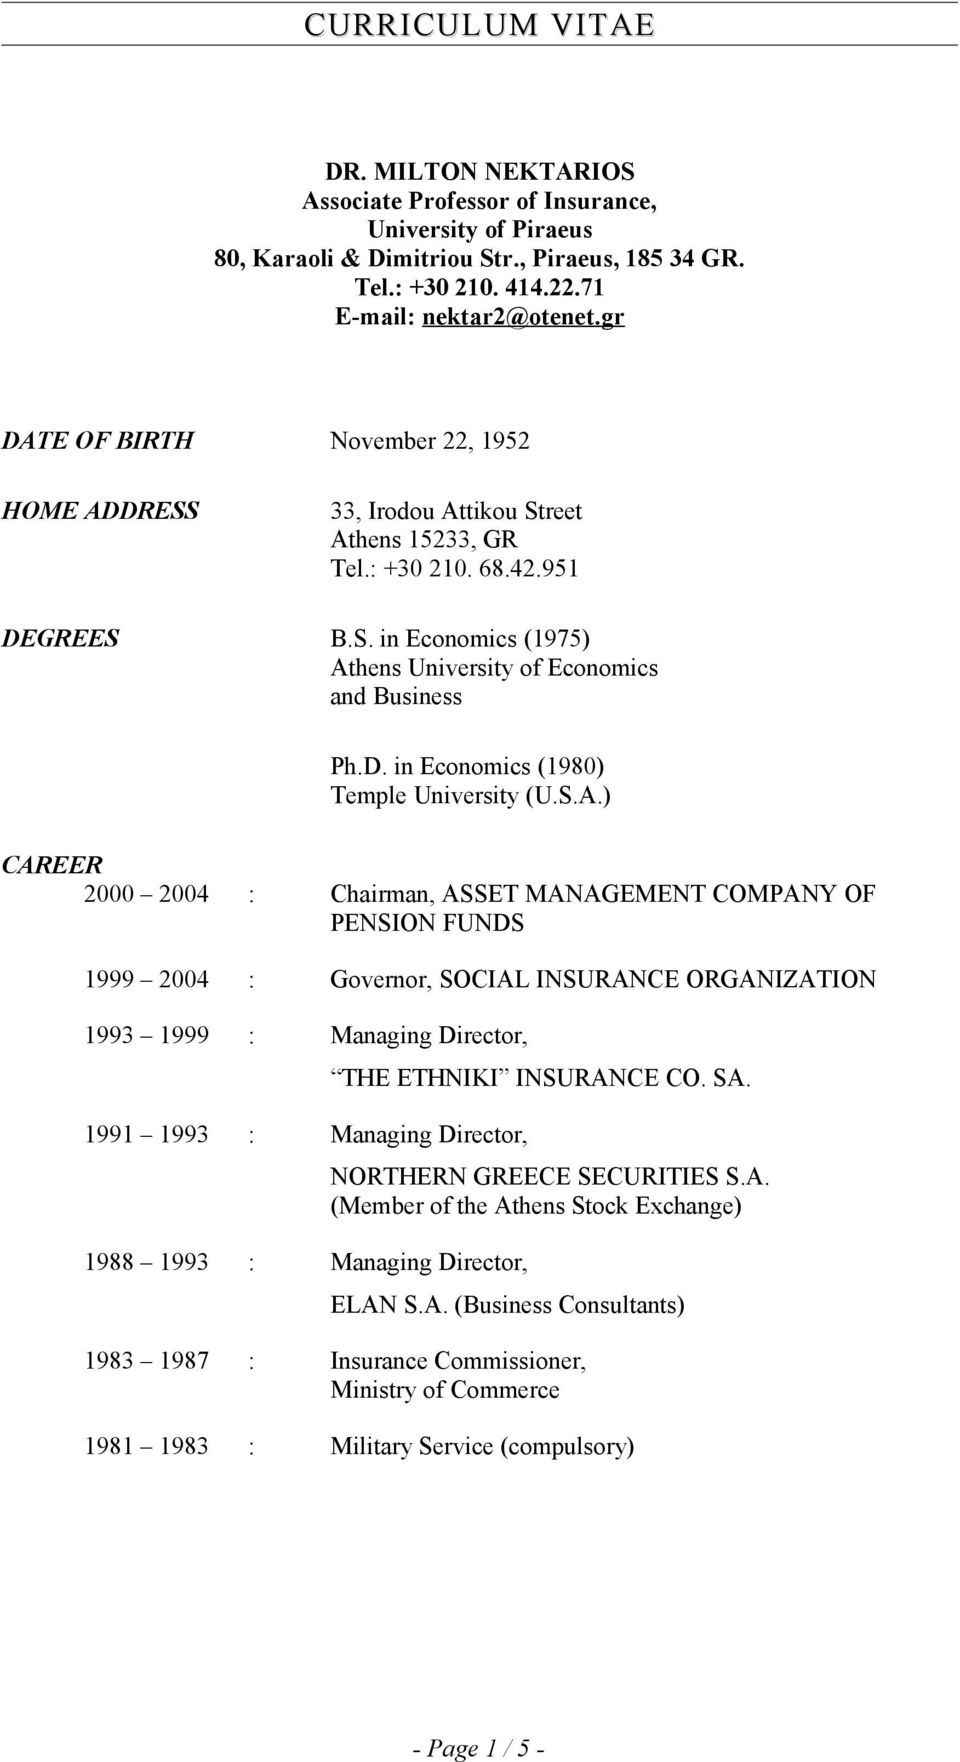 S.A.) CAREER 2000 2004 : Chairman, ASSET MANAGEMENT COMPANY OF PENSION FUNDS 1999 2004 : Governor, SOCIAL INSURANCE ORGANIZATION 1993 1999 : Managing Director, 1991 1993 : Managing Director, 1988